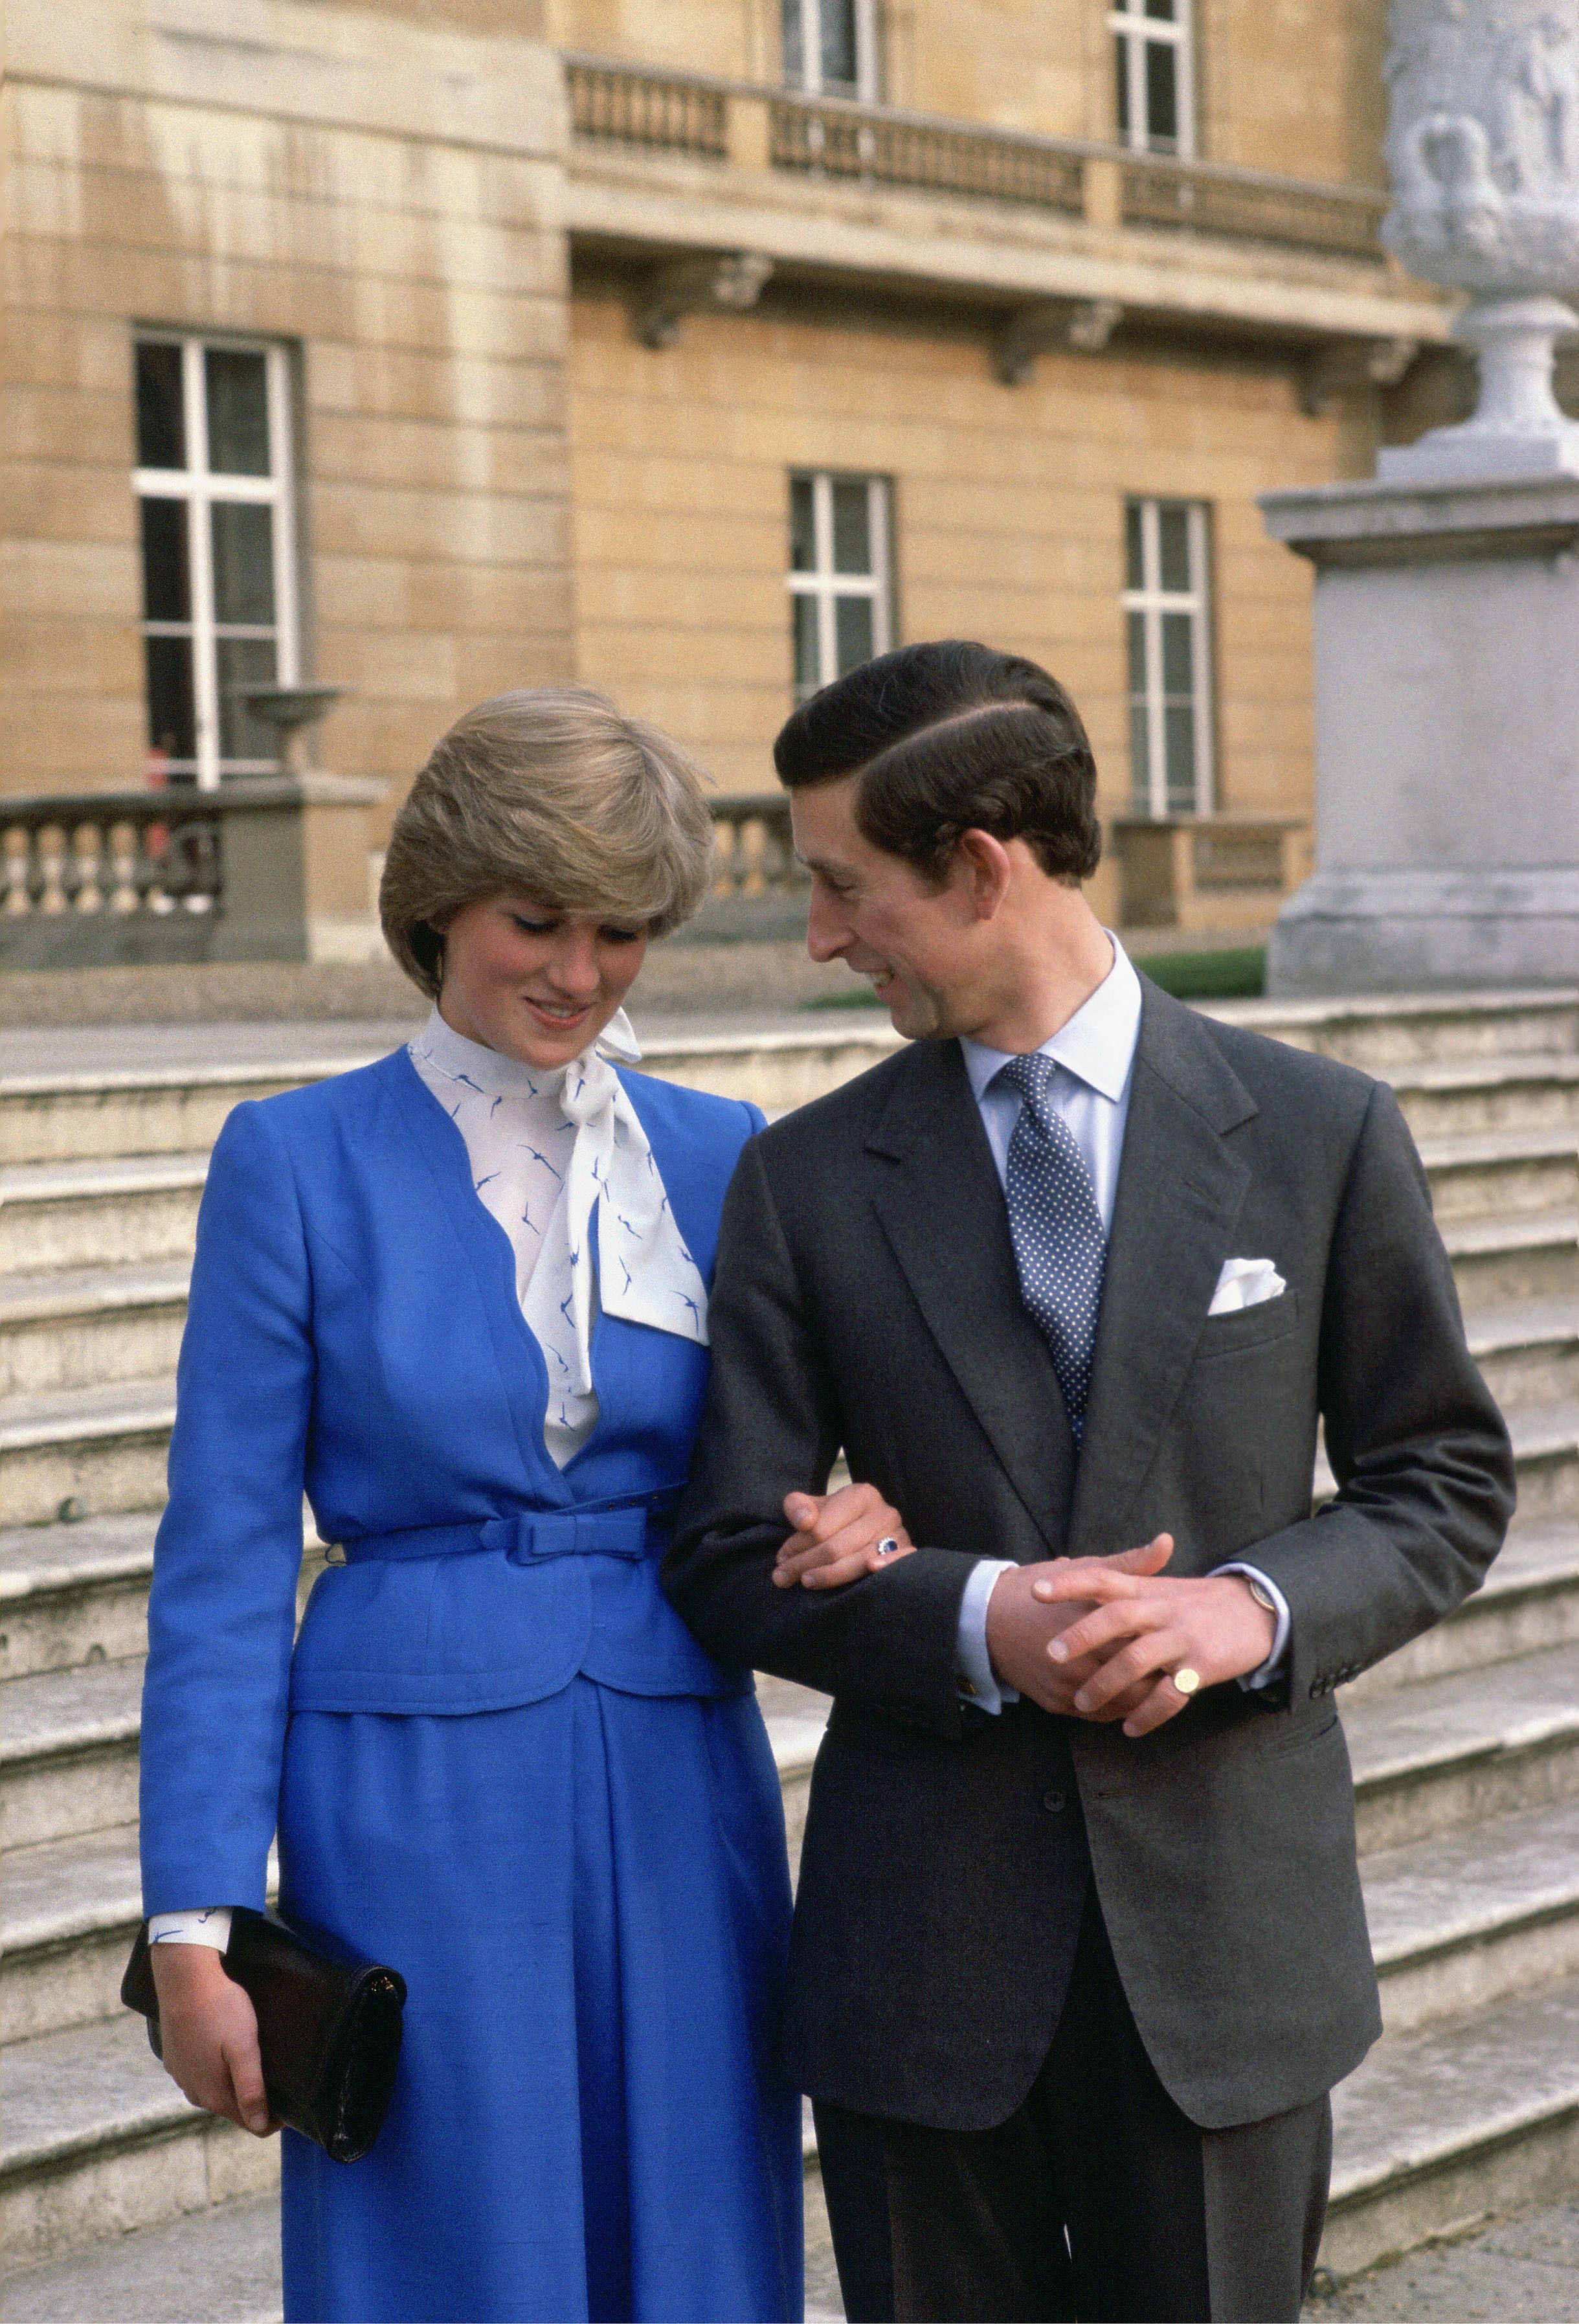 Diana and Charles' wedding cake up for auction